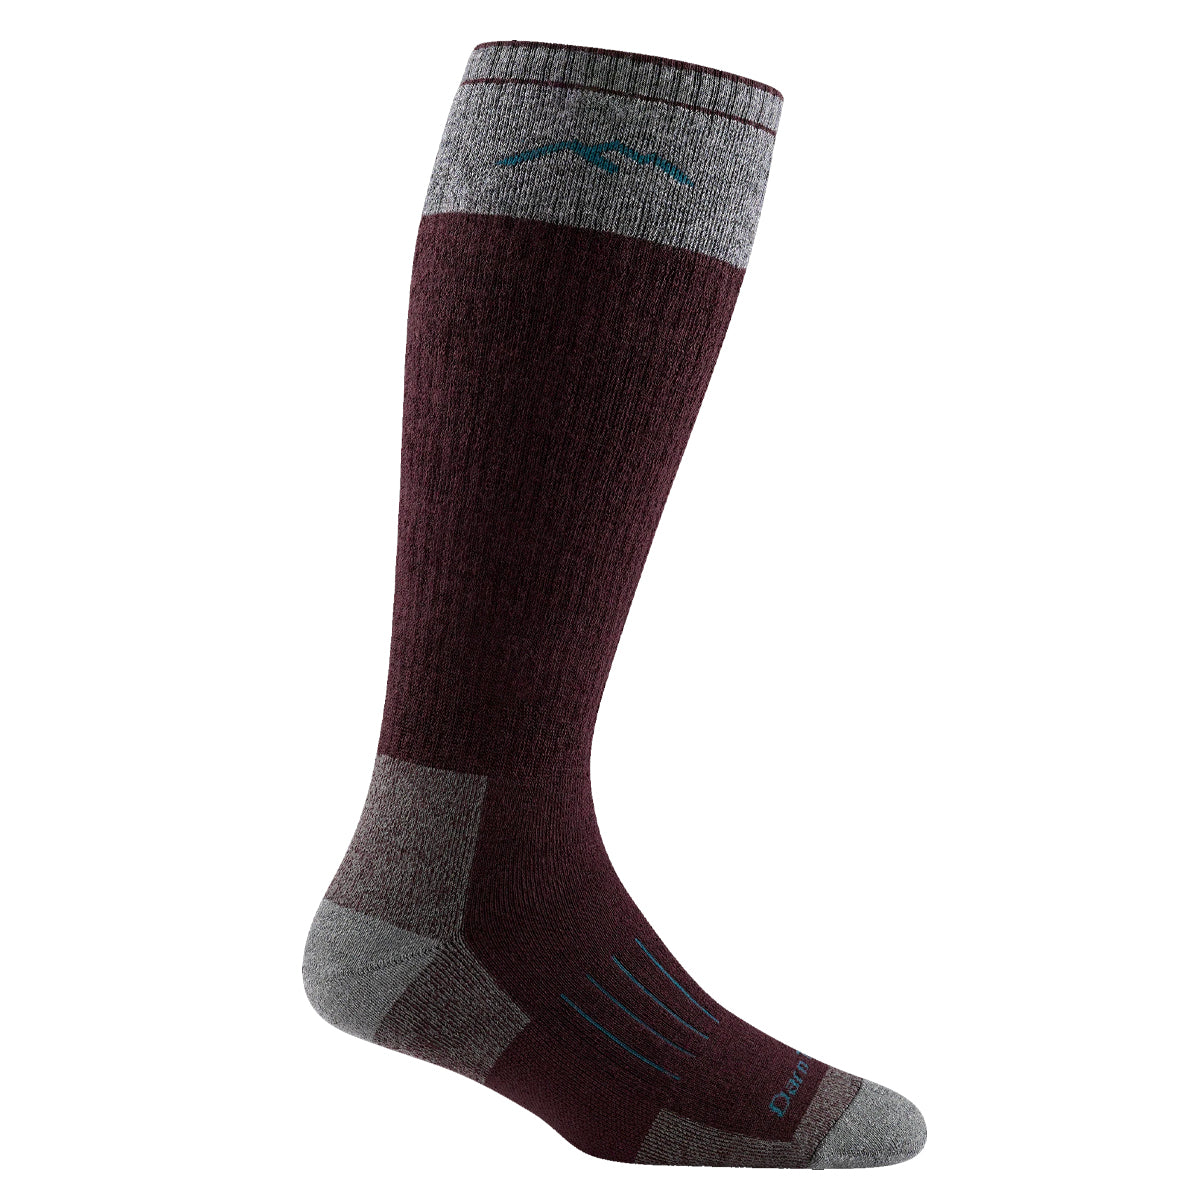 Darn Tough 2105 Women's Over-the-Calf Heavyweight Hunting Sock in  by GOHUNT | Darn Tough Vermont - GOHUNT Shop